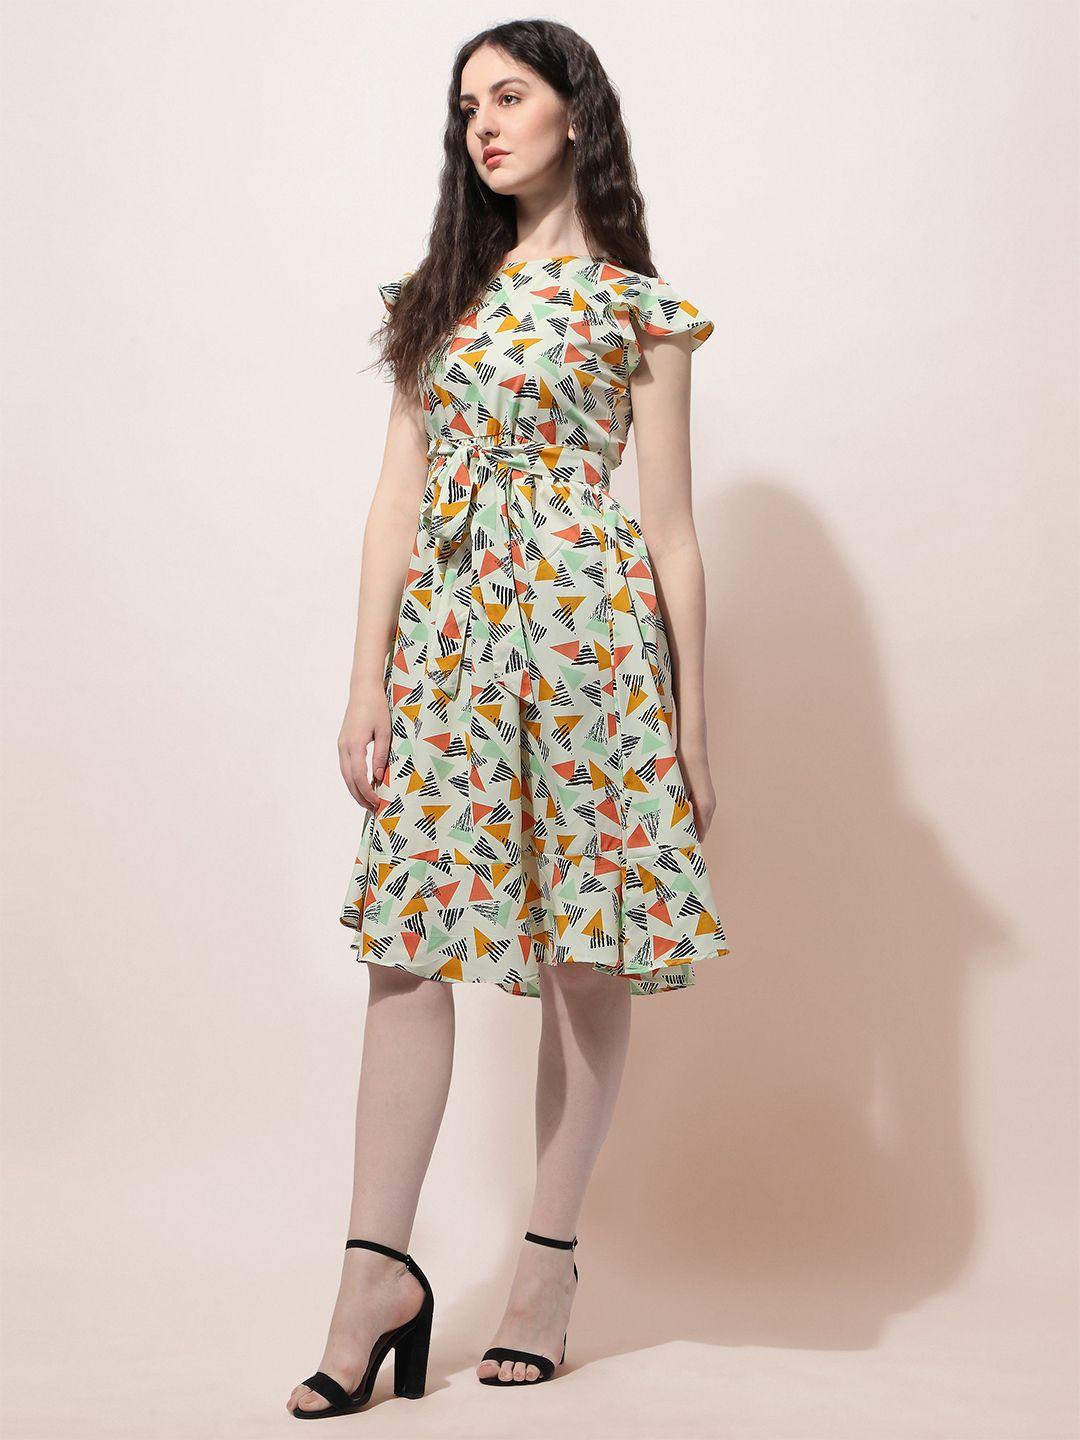 oomph! printed fit & flare dress